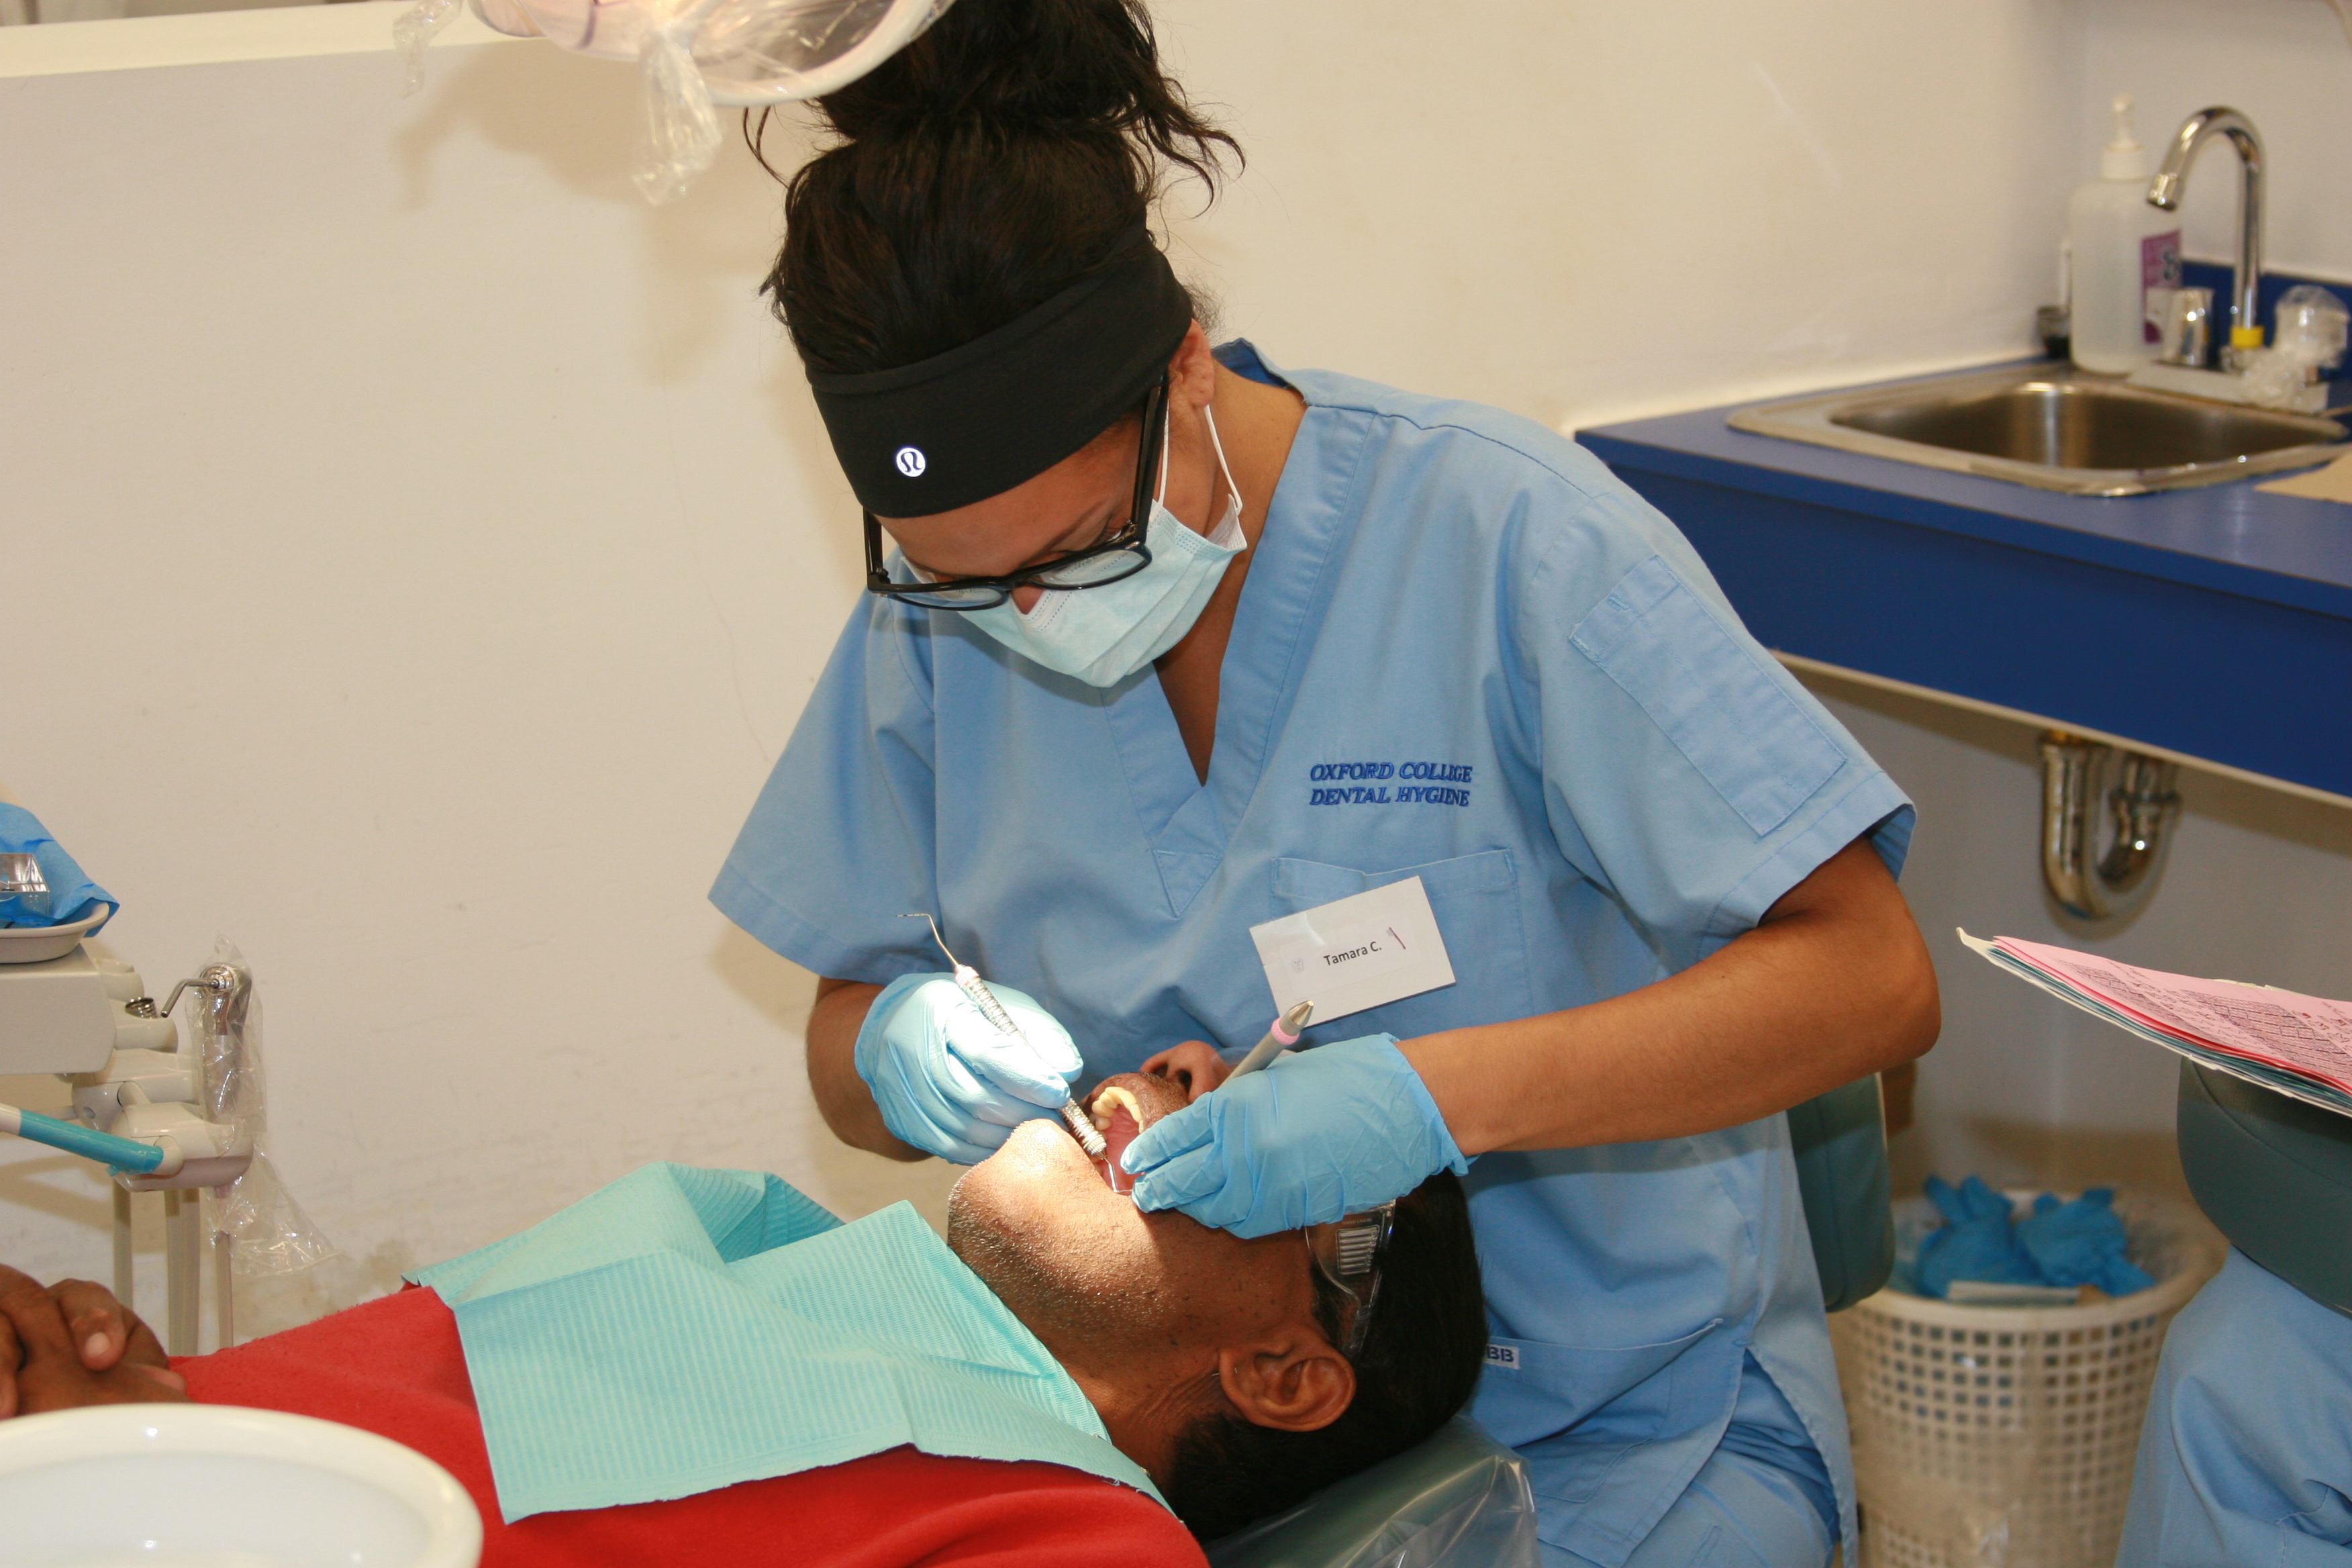 CareerCast.com, one of North America’s leading online resources about careers, has listed Dental Hygienist as one of the top ten Most Underrated Jobs. “While terms like flashy, glitzy, glamorous and...